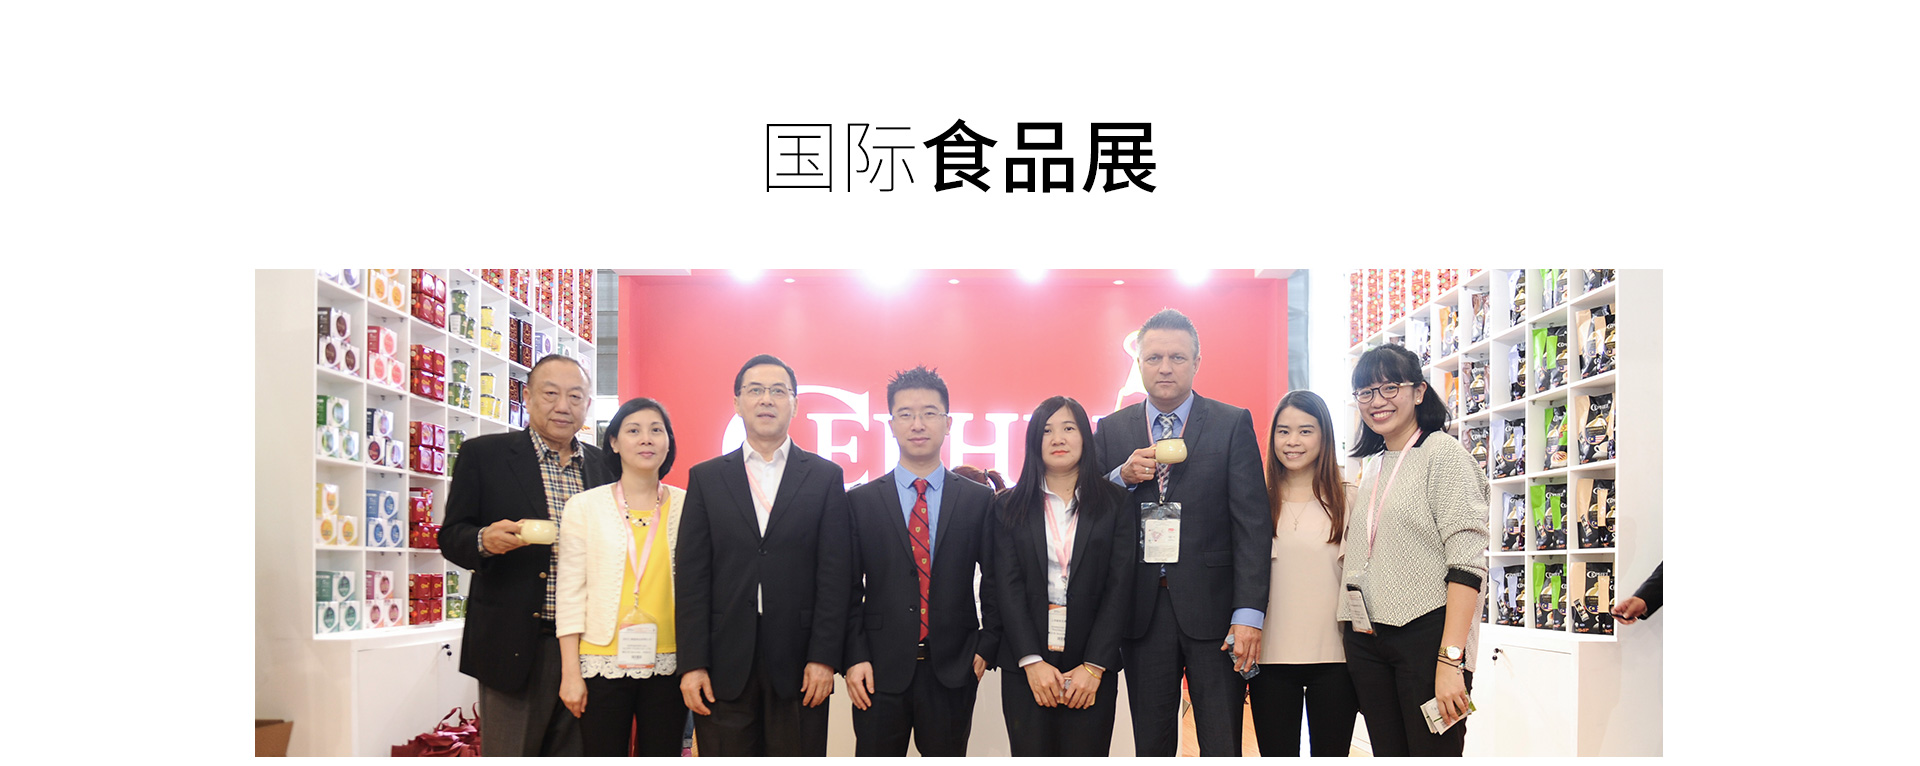 sial_china_exhibition